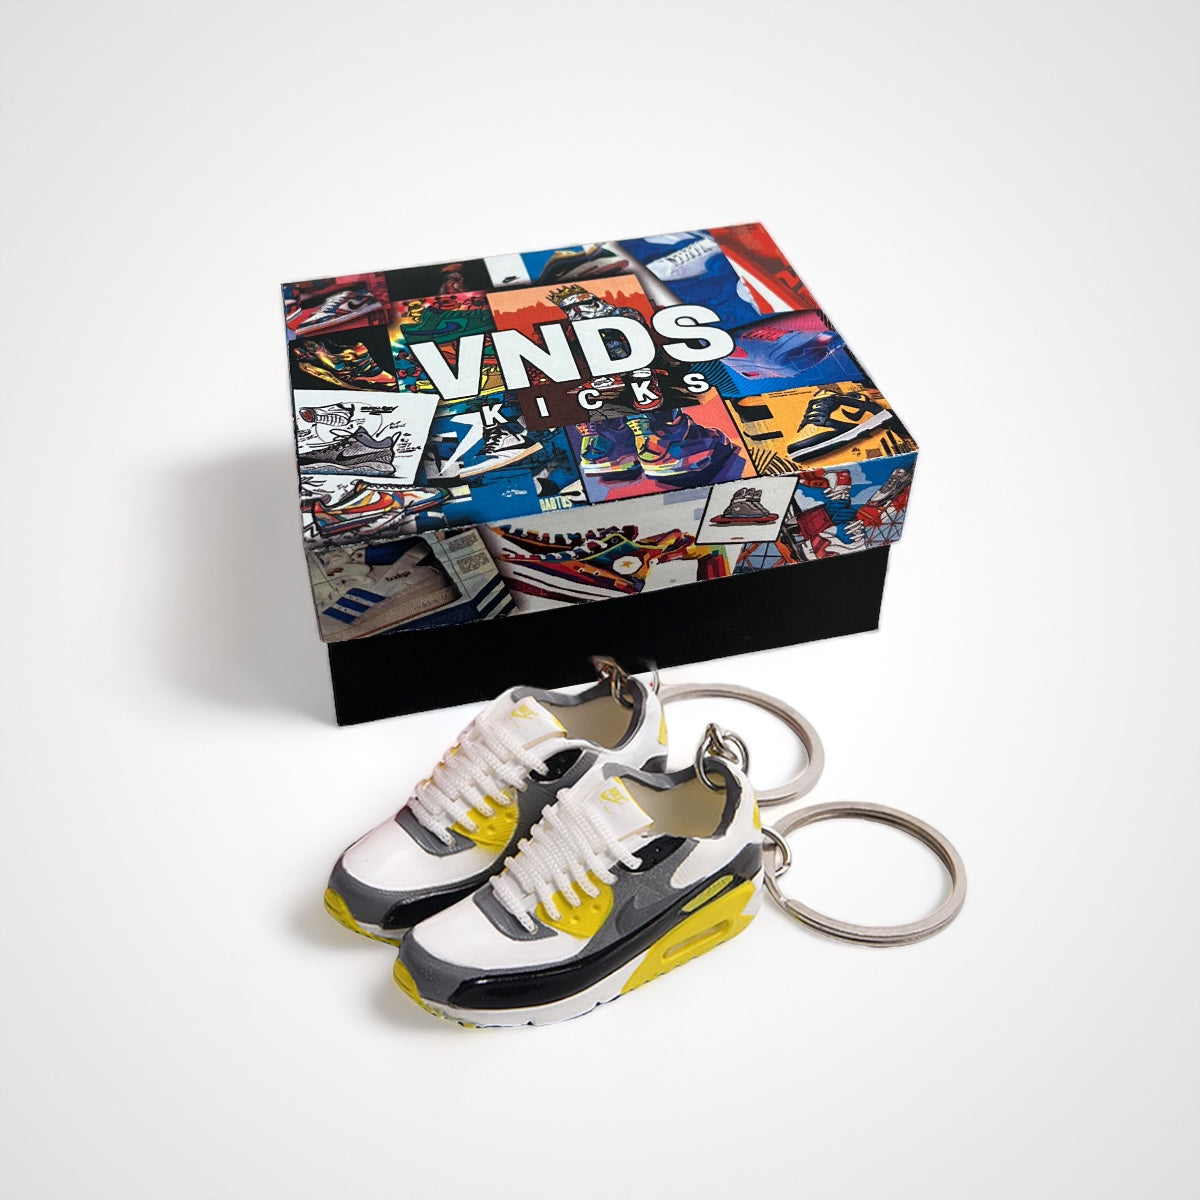 Air Max 90 "Livestrong" - Sneakers 3D Keychain